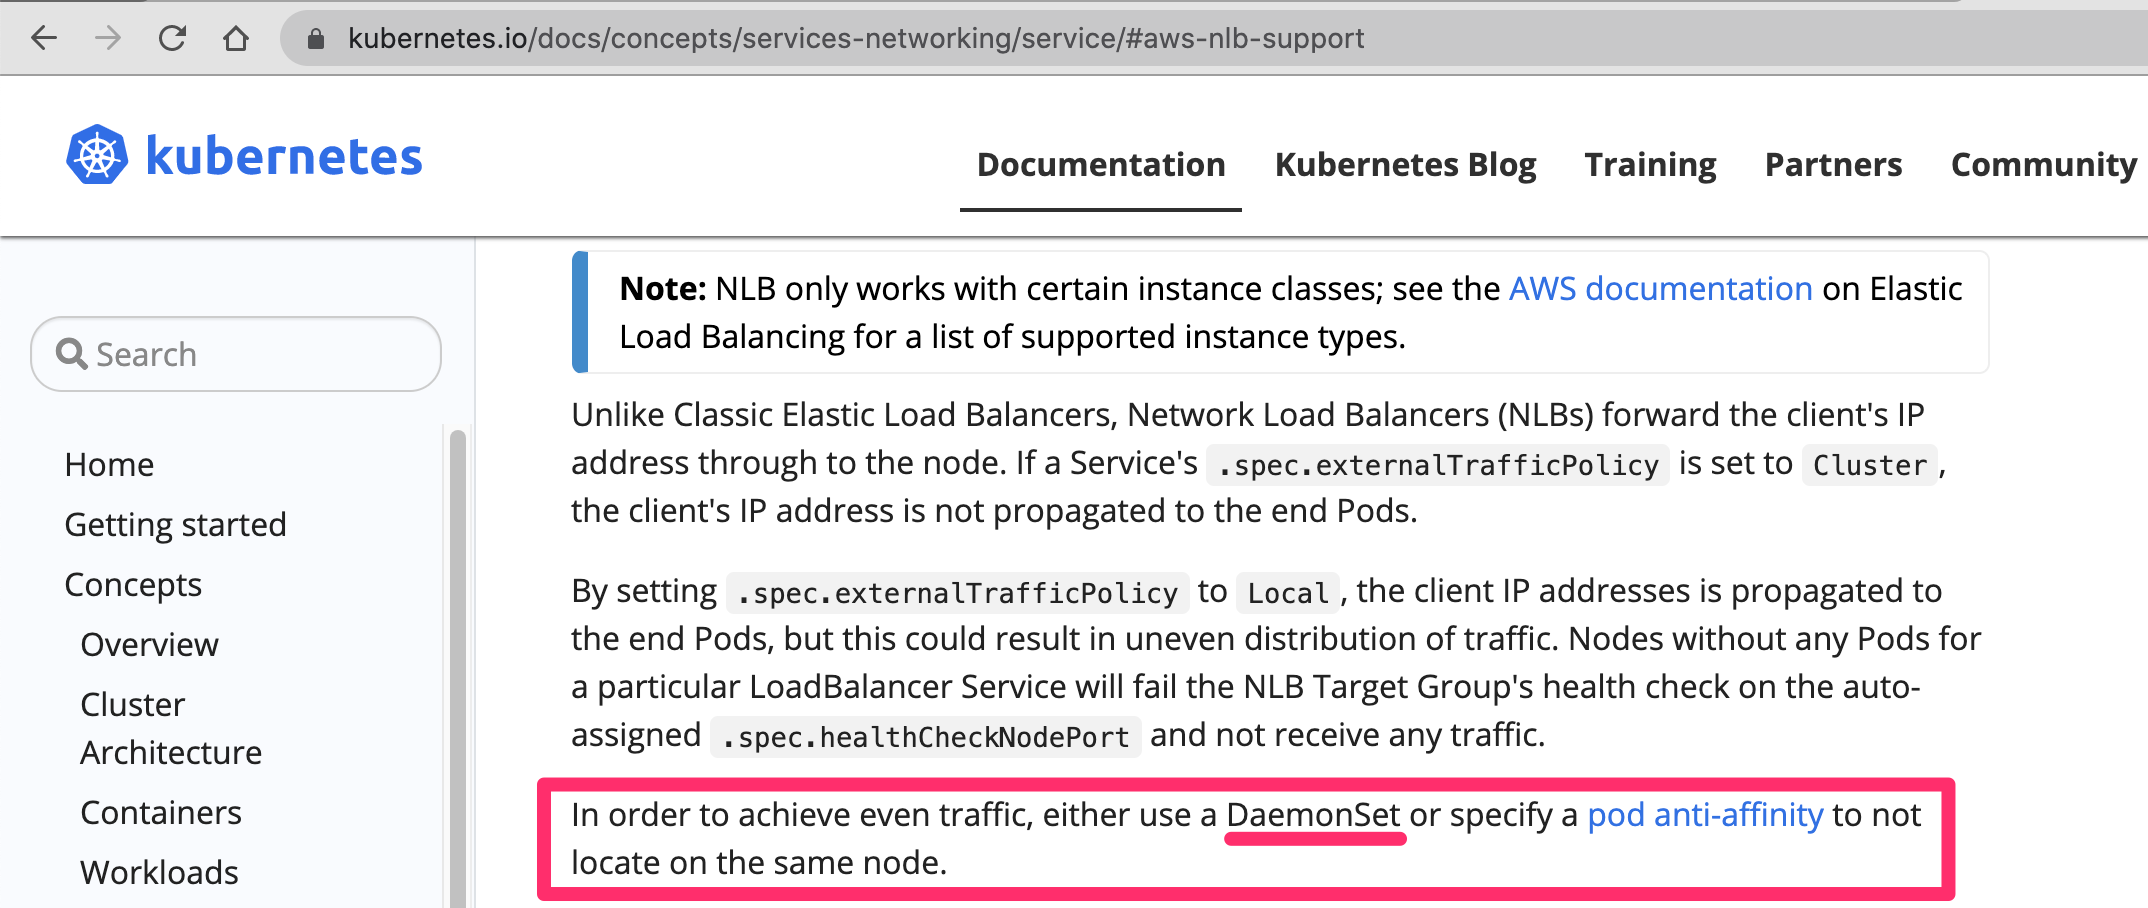 https://kubernetes.io/docs/concepts/services-networking/service/#aws-nlb-support 2020/11/18